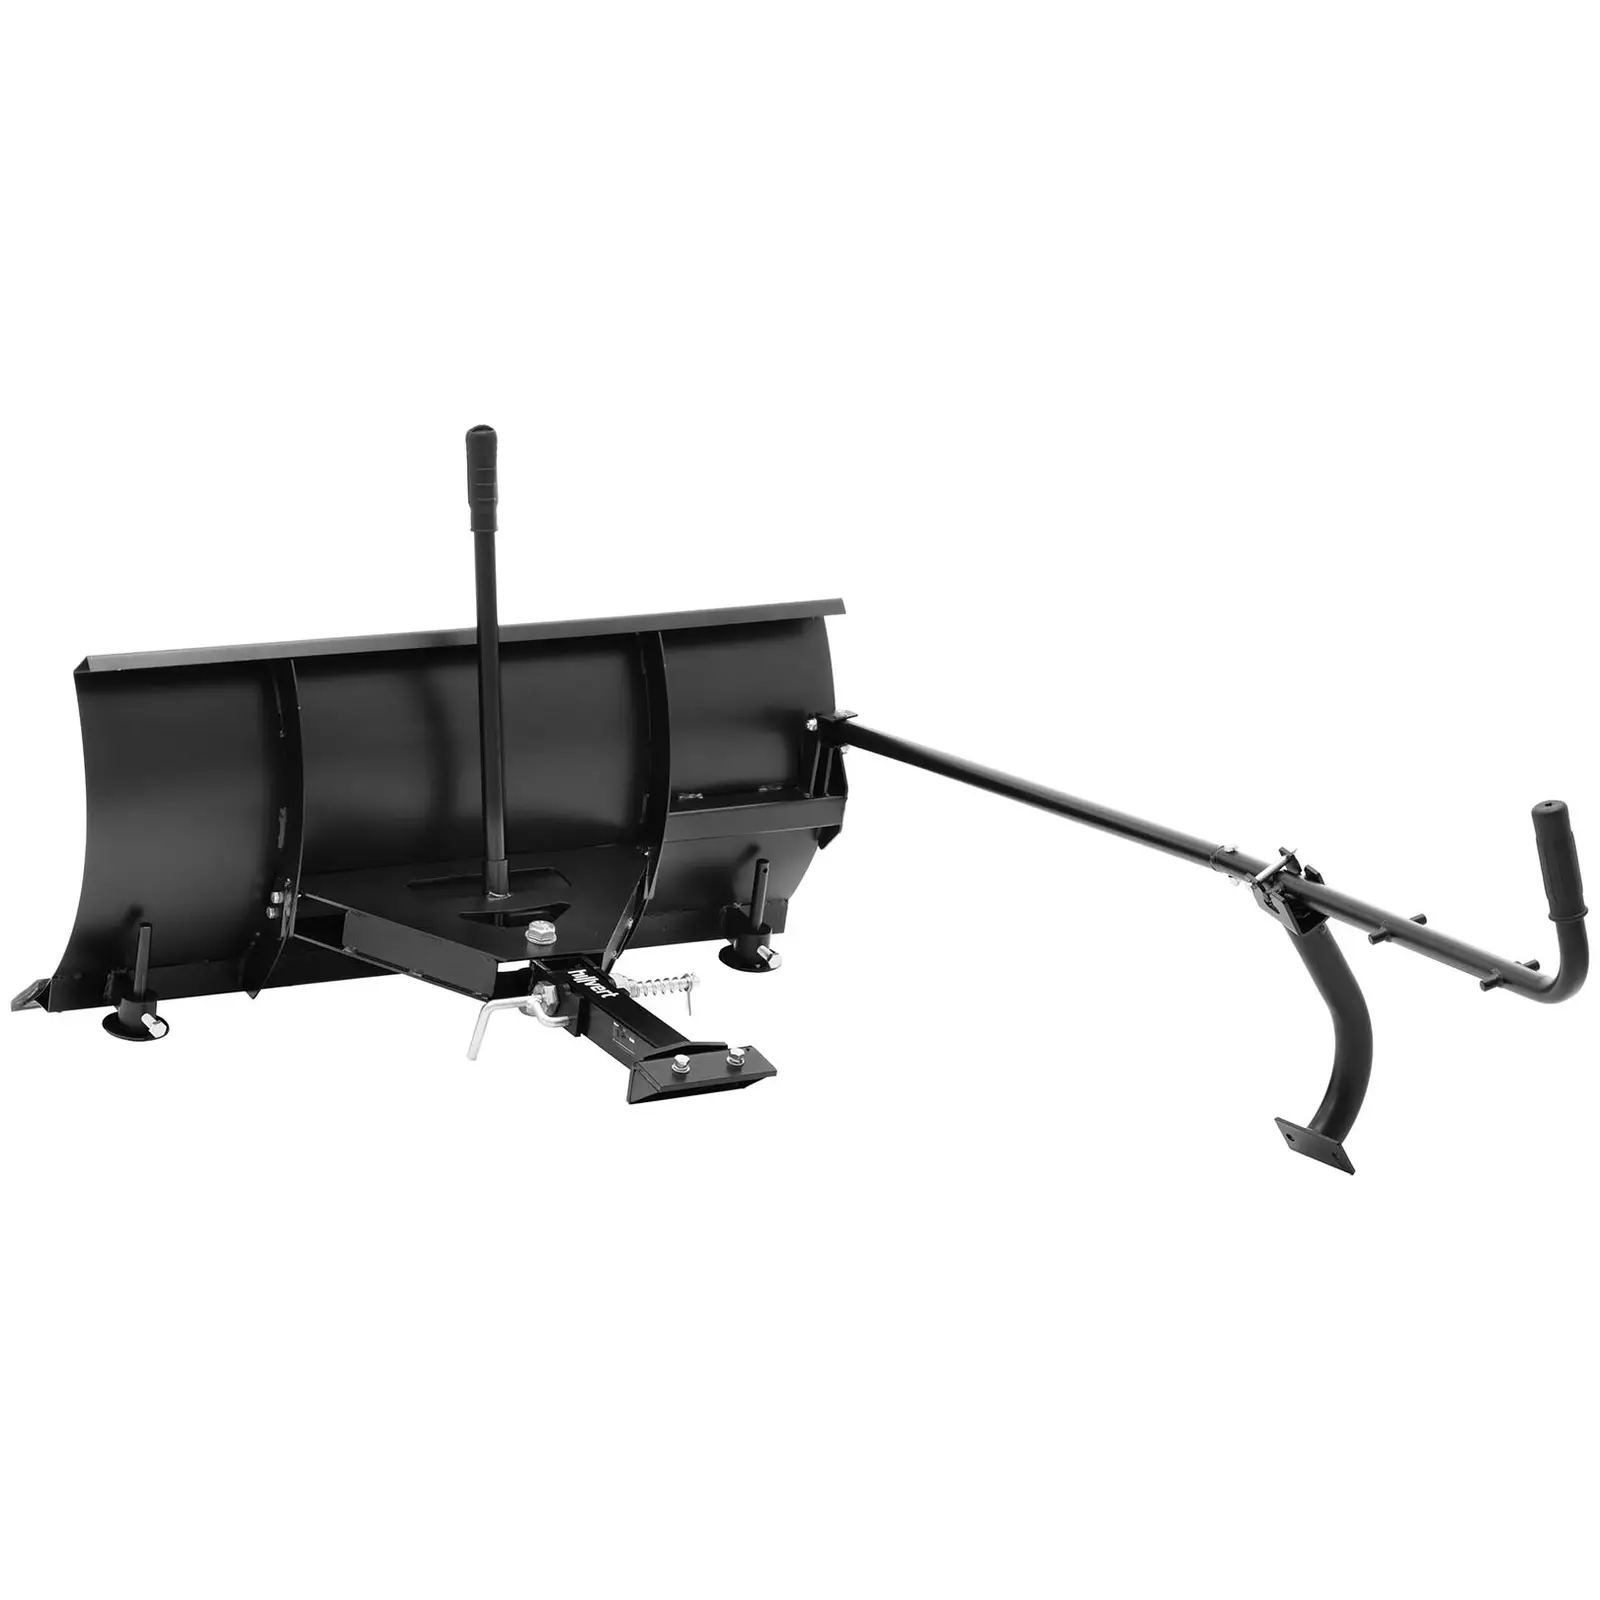 Snow Plough - 99 x 166 x 60 cm - steel - for track carrier HT-MD-500 - 4